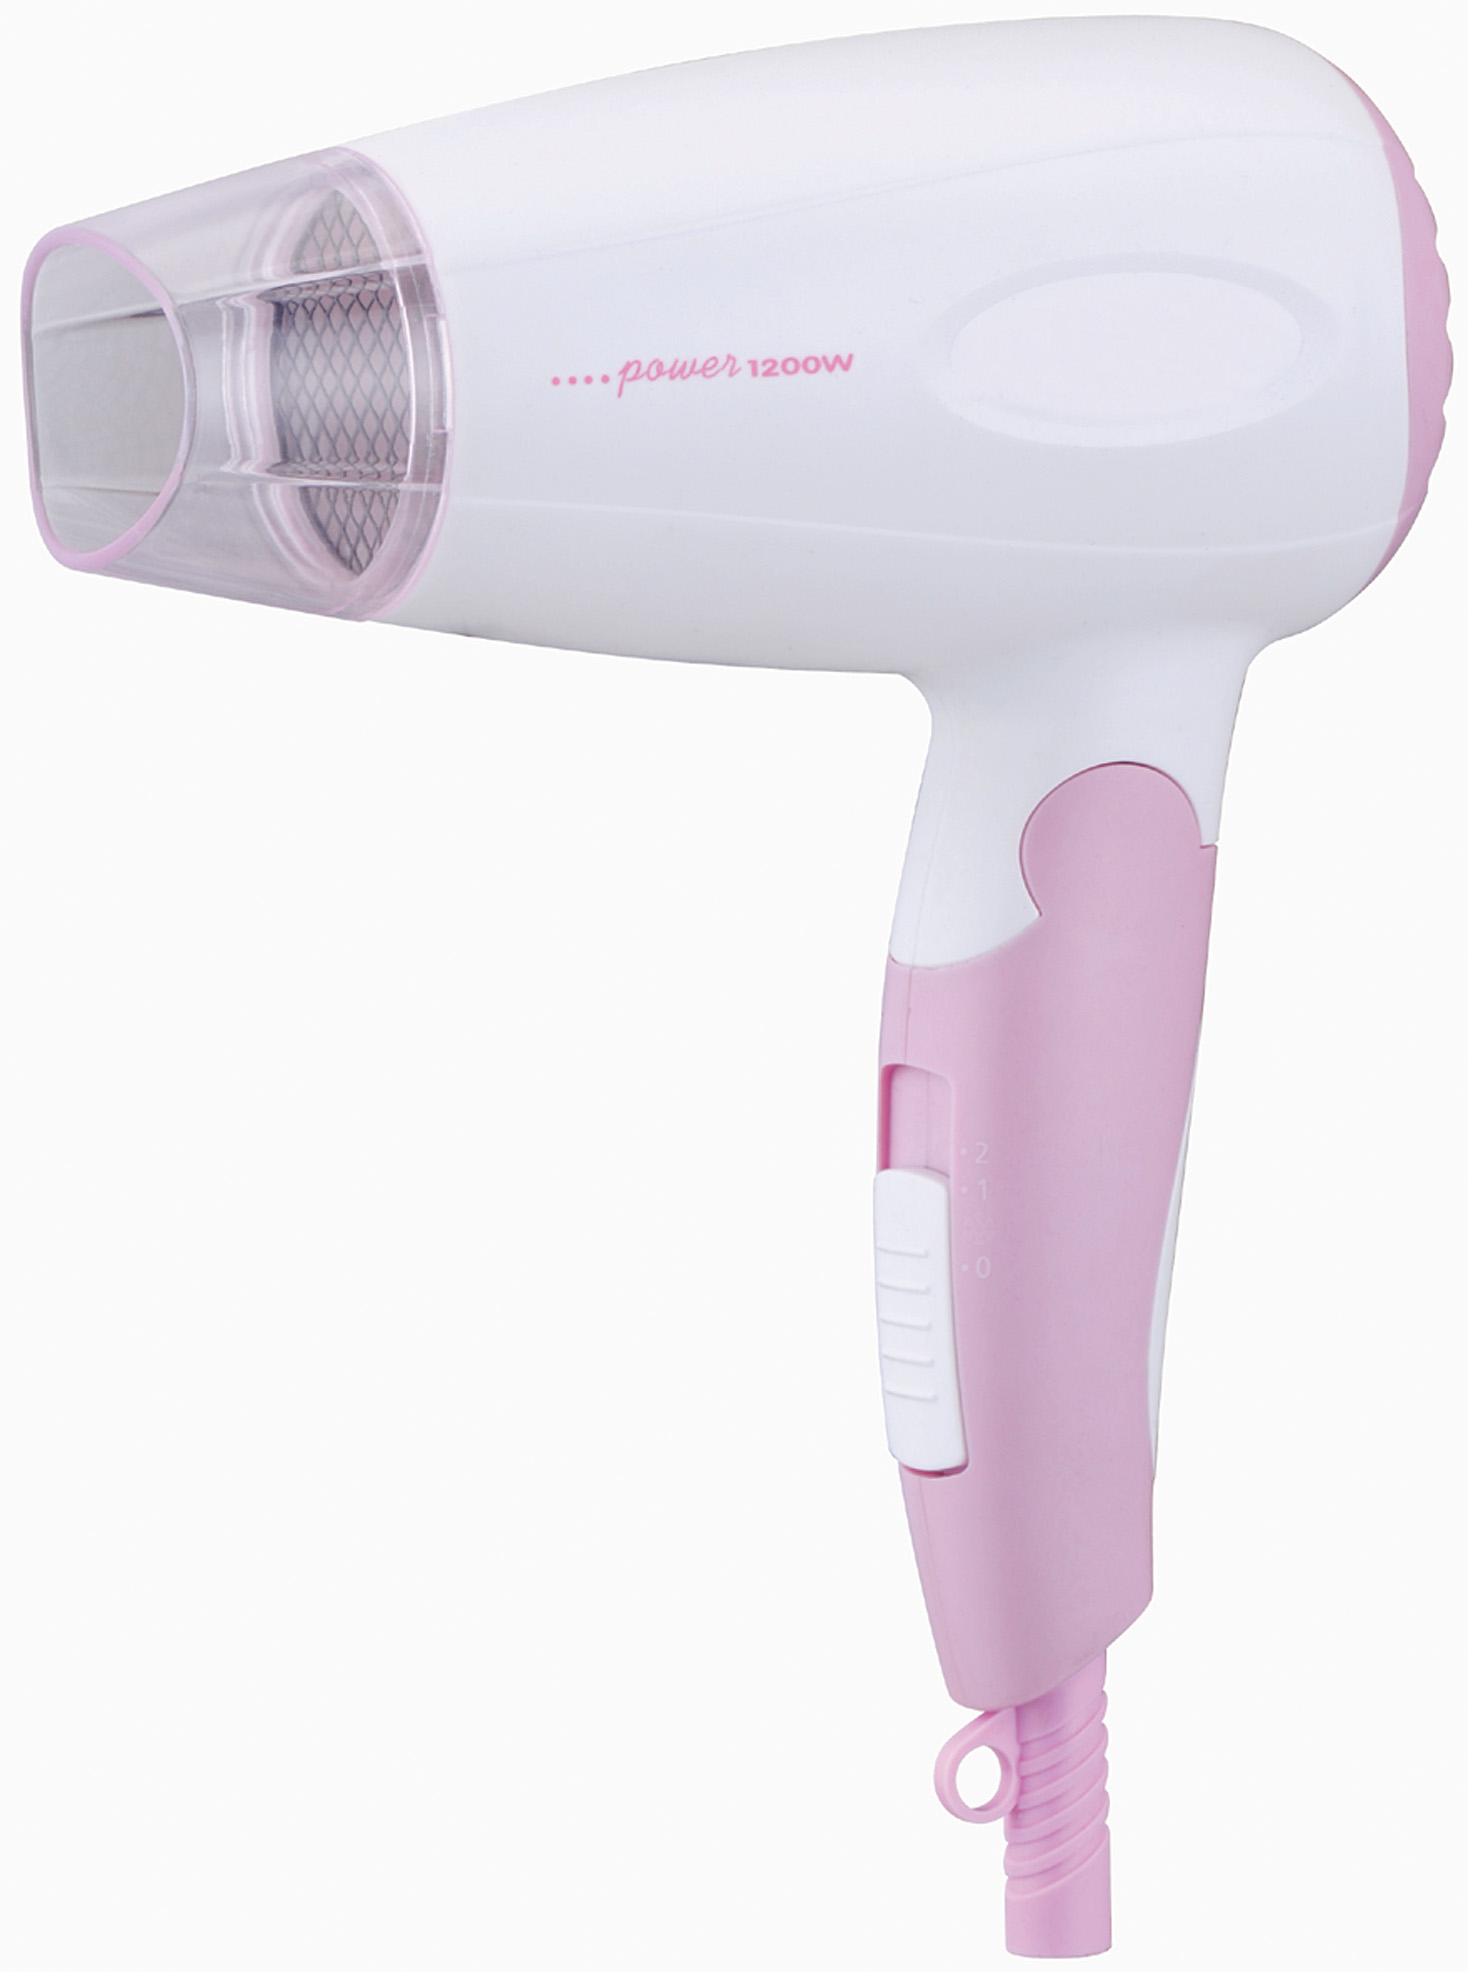 1000w Hotel/Travel Foldable Hair Dryer Made in Korea